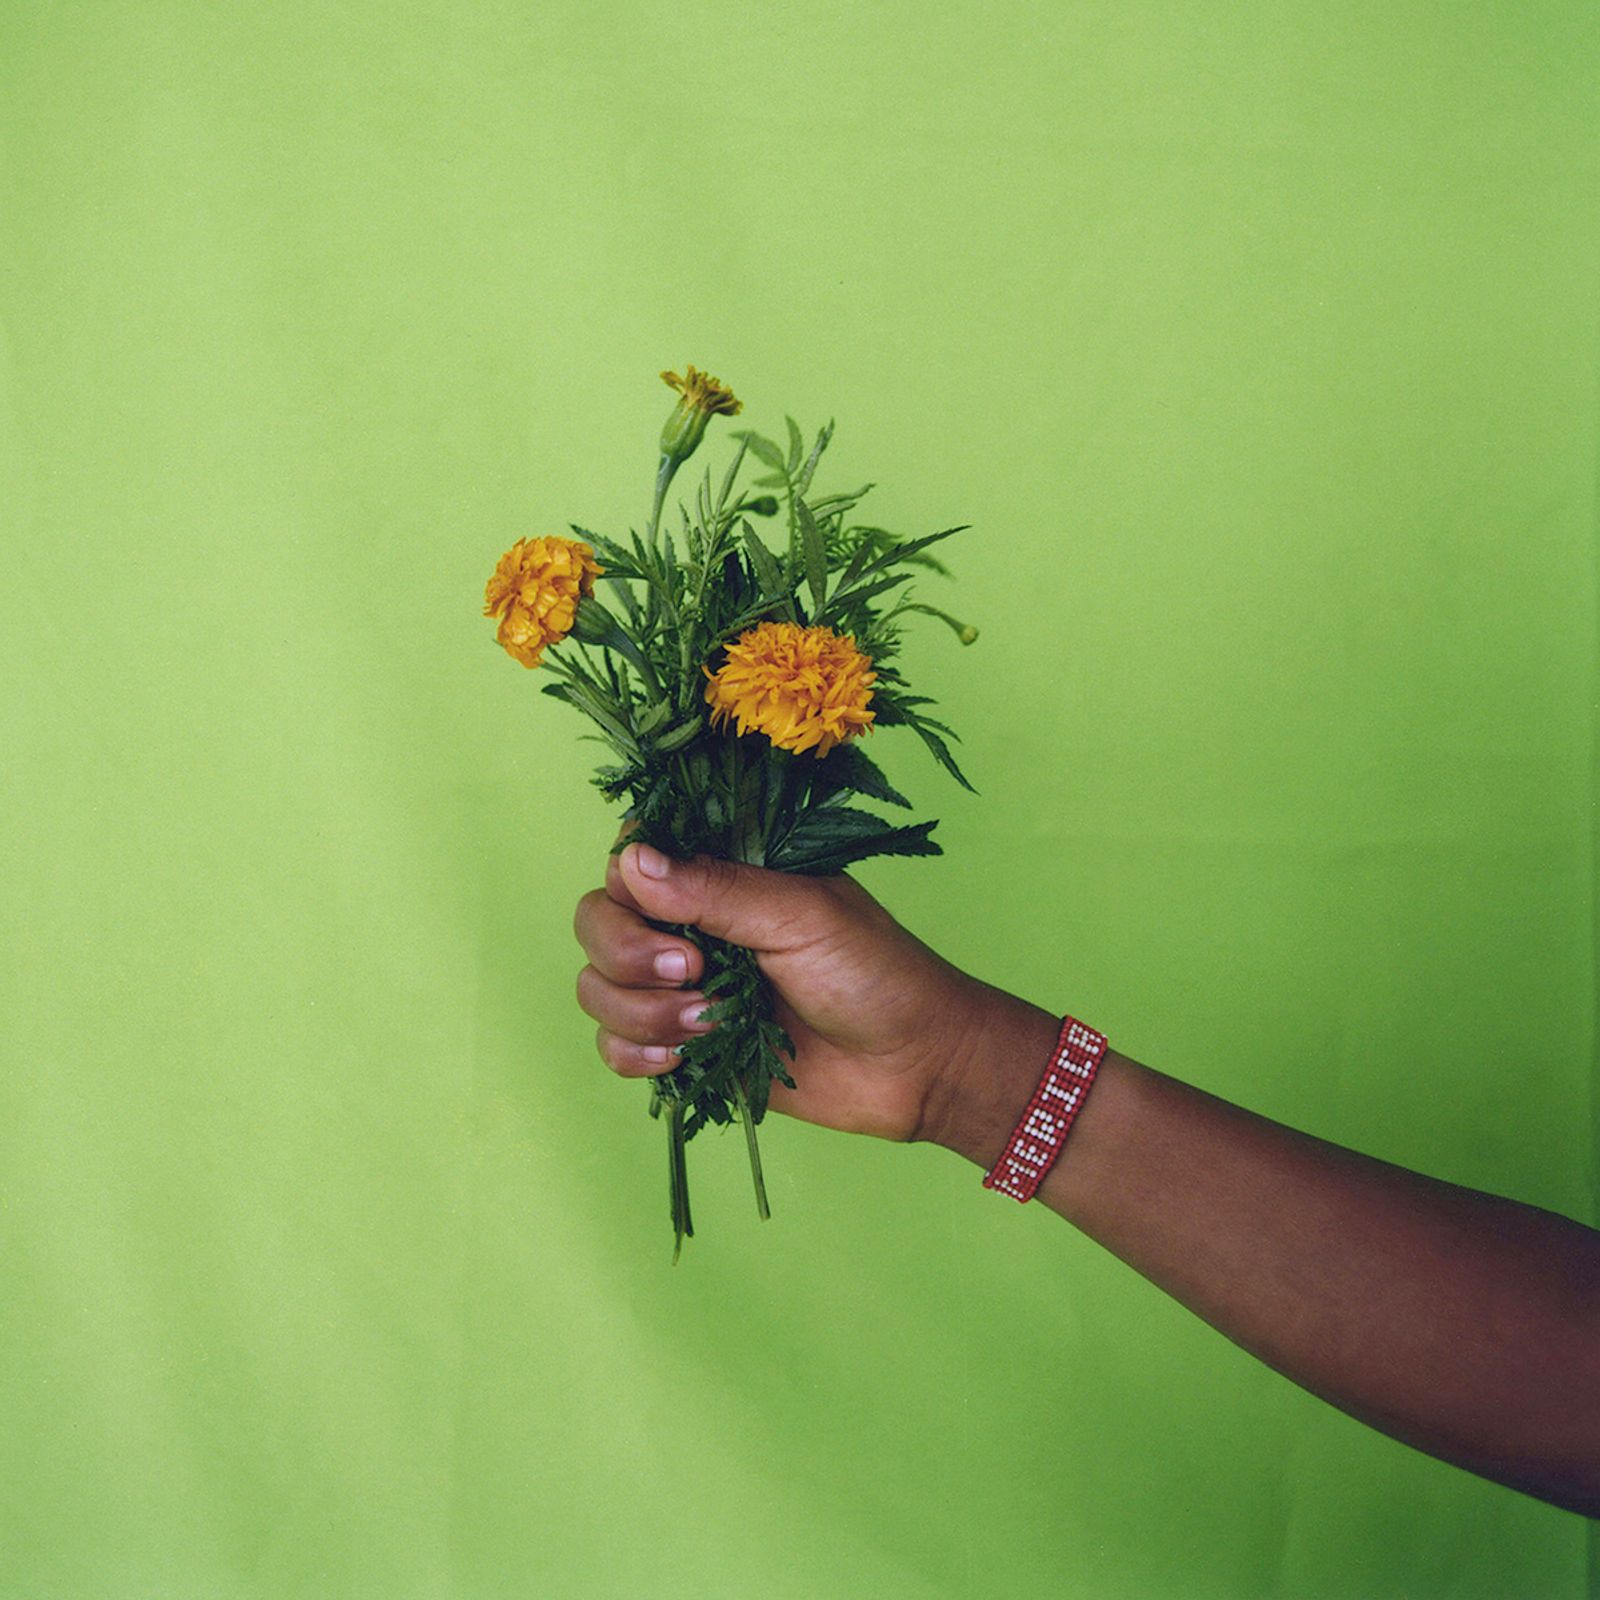 © Karen Paulina Biswell - Image from the nama bu photography project